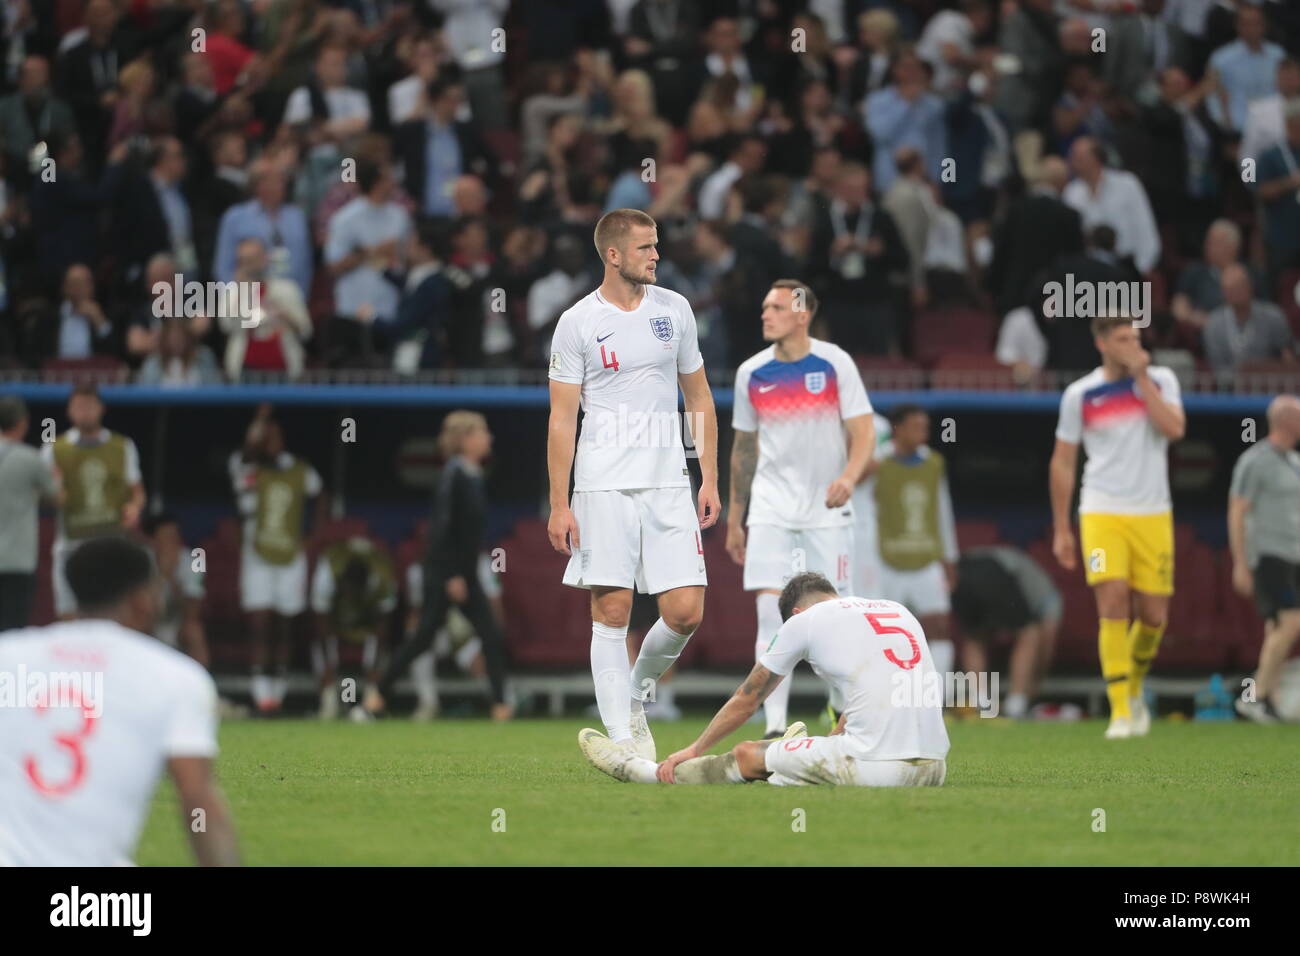 FIFA World Cup Russia 2018. Semifinals. Croatia vs England at Luzniki Stadium. English team after the match. July 11, 2018. Russia, Moscow. Photo credit: Vasily Ponomorev/Kommersant Stock Photo